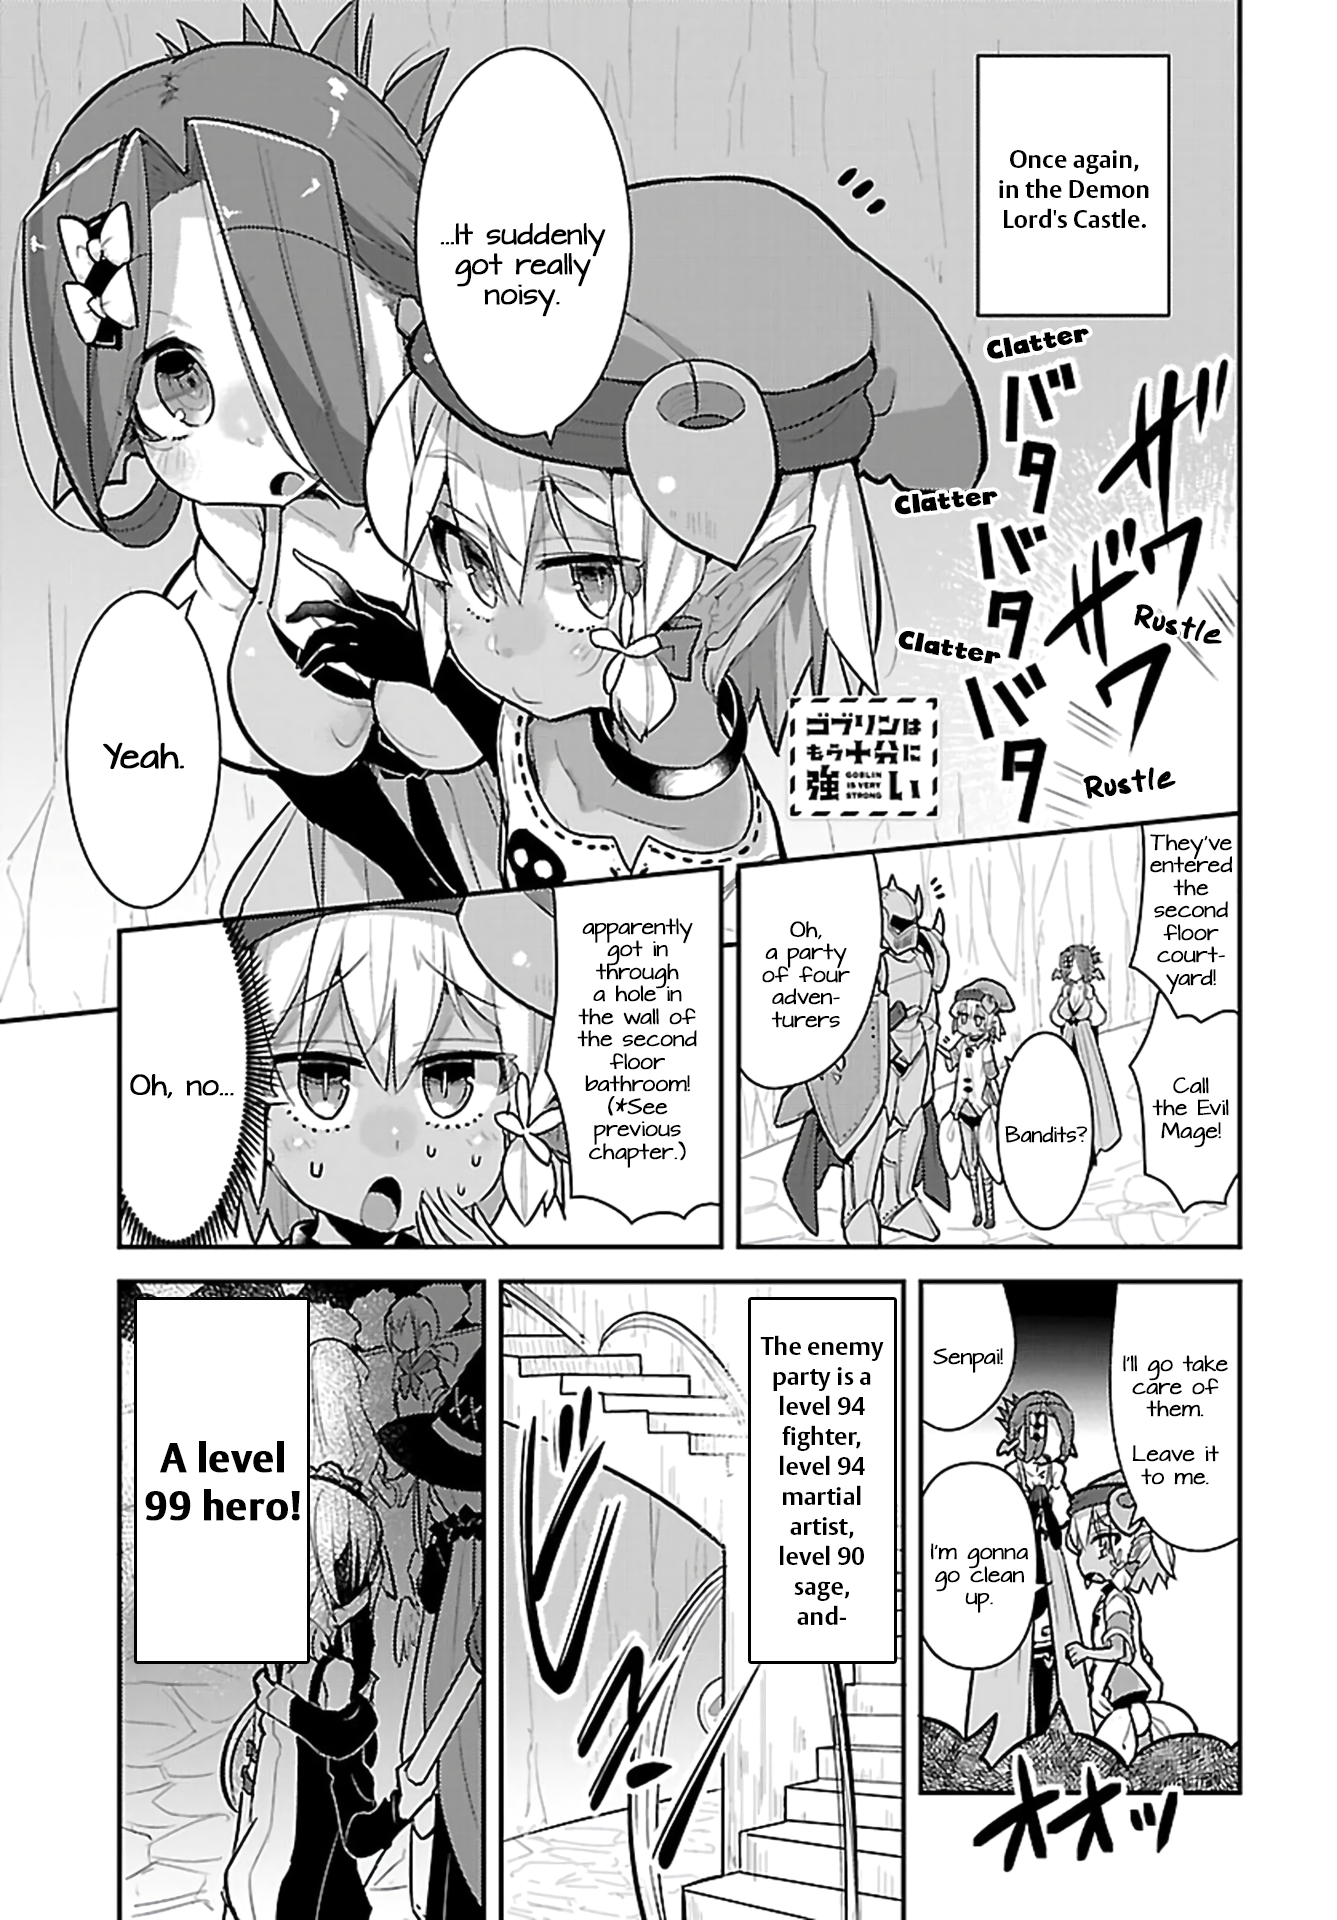 Goblin Is Very Strong - Page 1